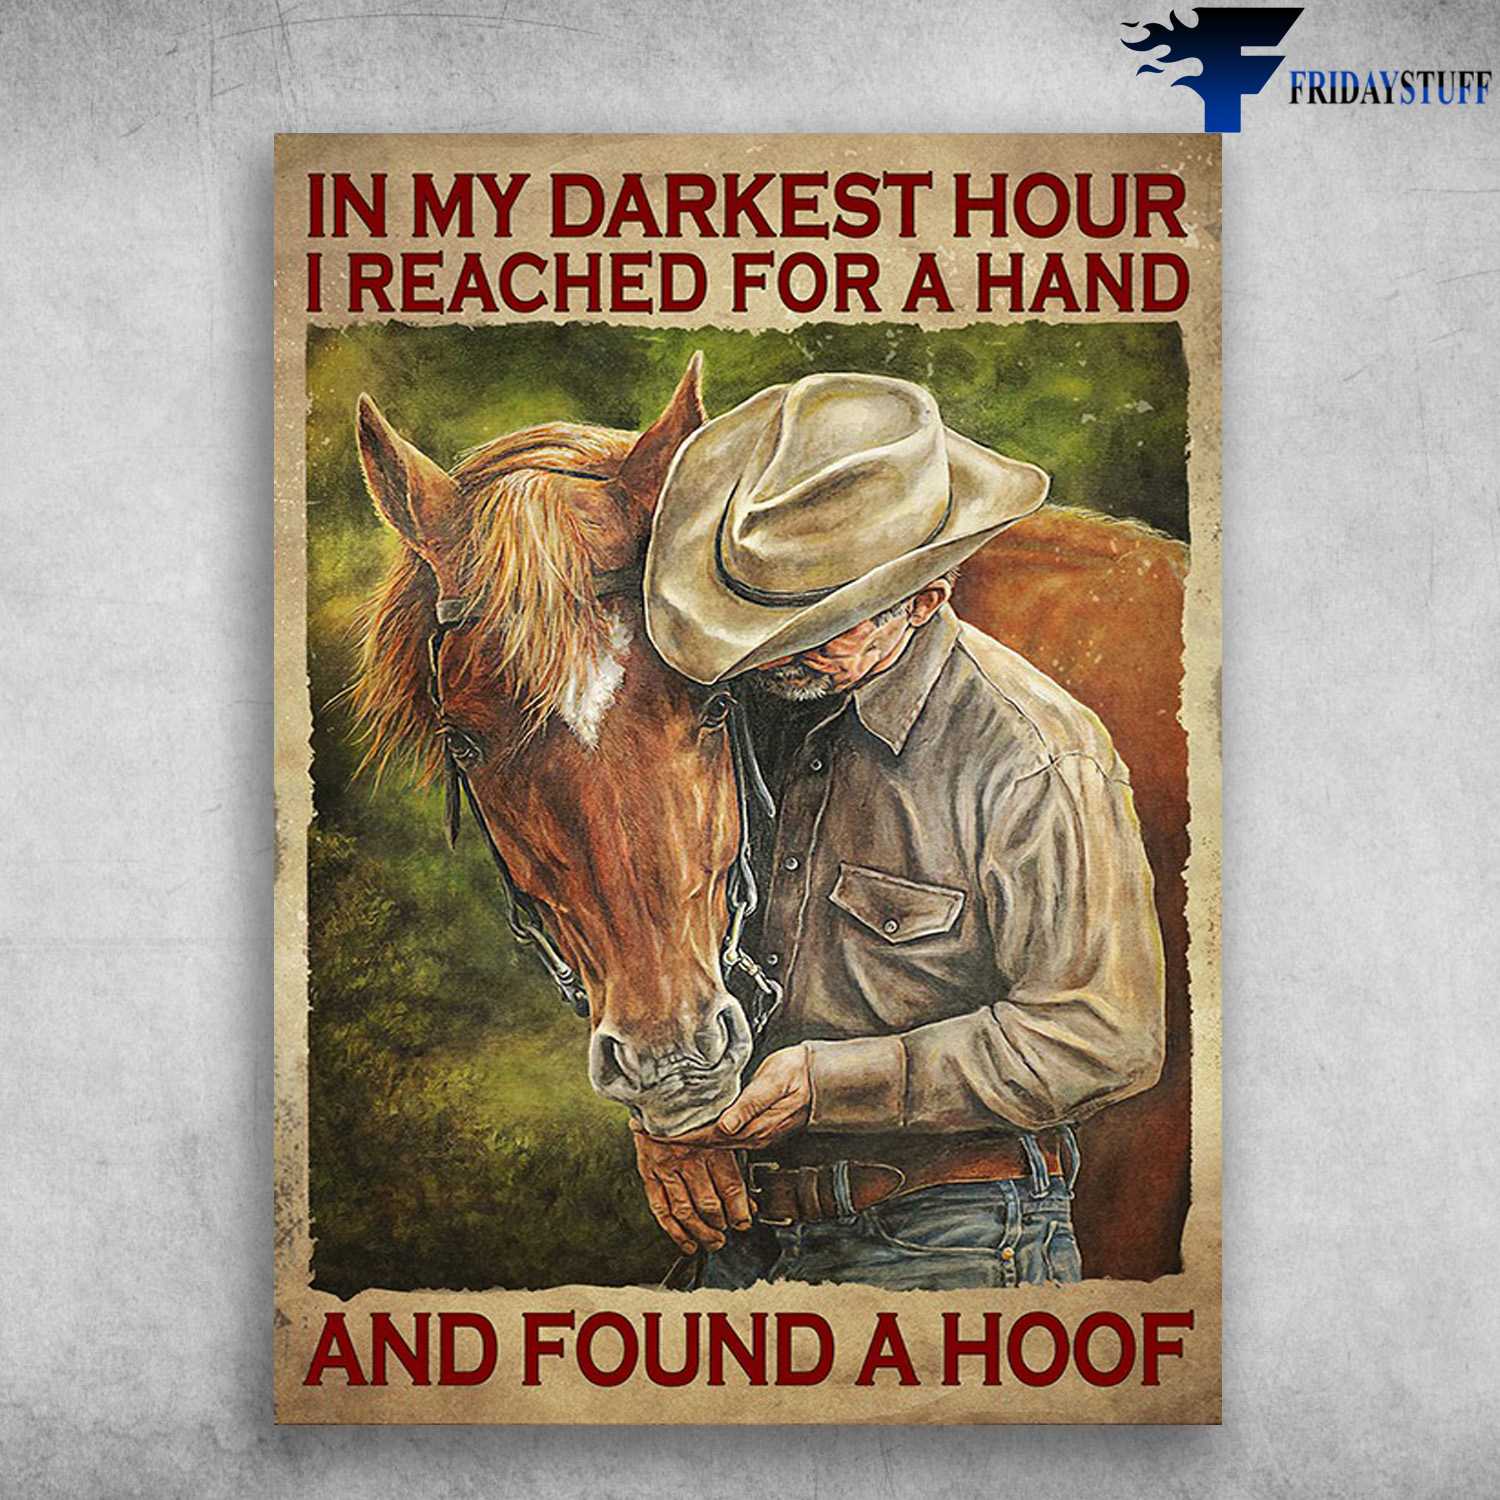 Old Man And Horse, Horse Poster - In My Darkest Hour, I Reached For A Hand, And Found A Hoof